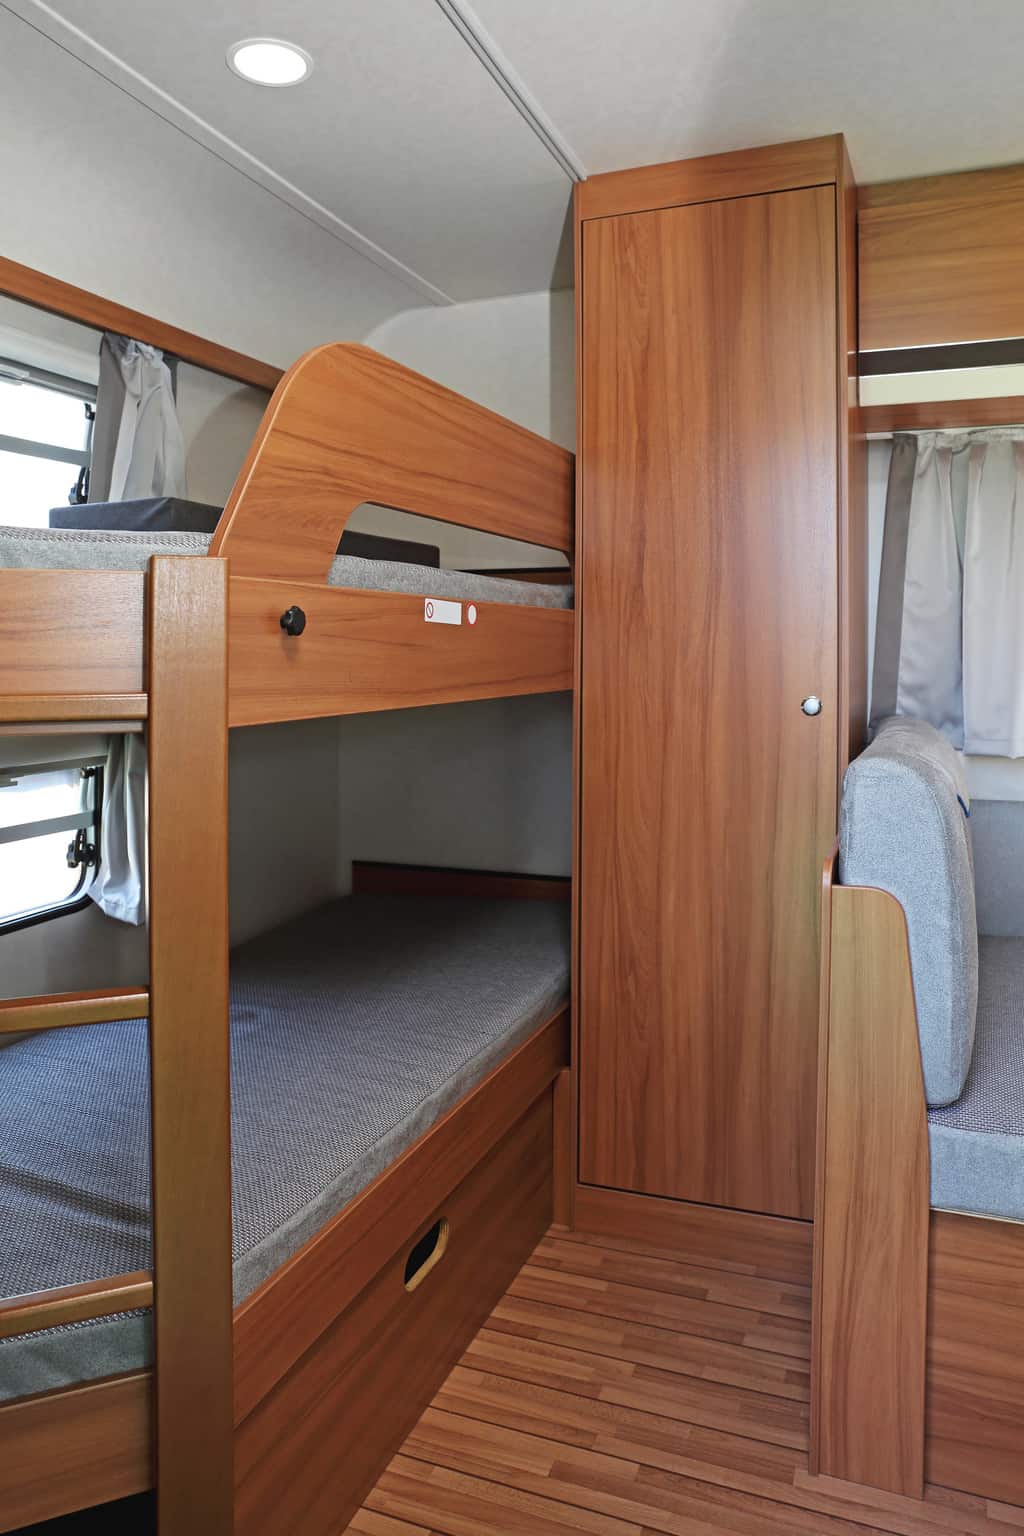 What Size Mattresses Are In Most, Rv Bunk Bed Size